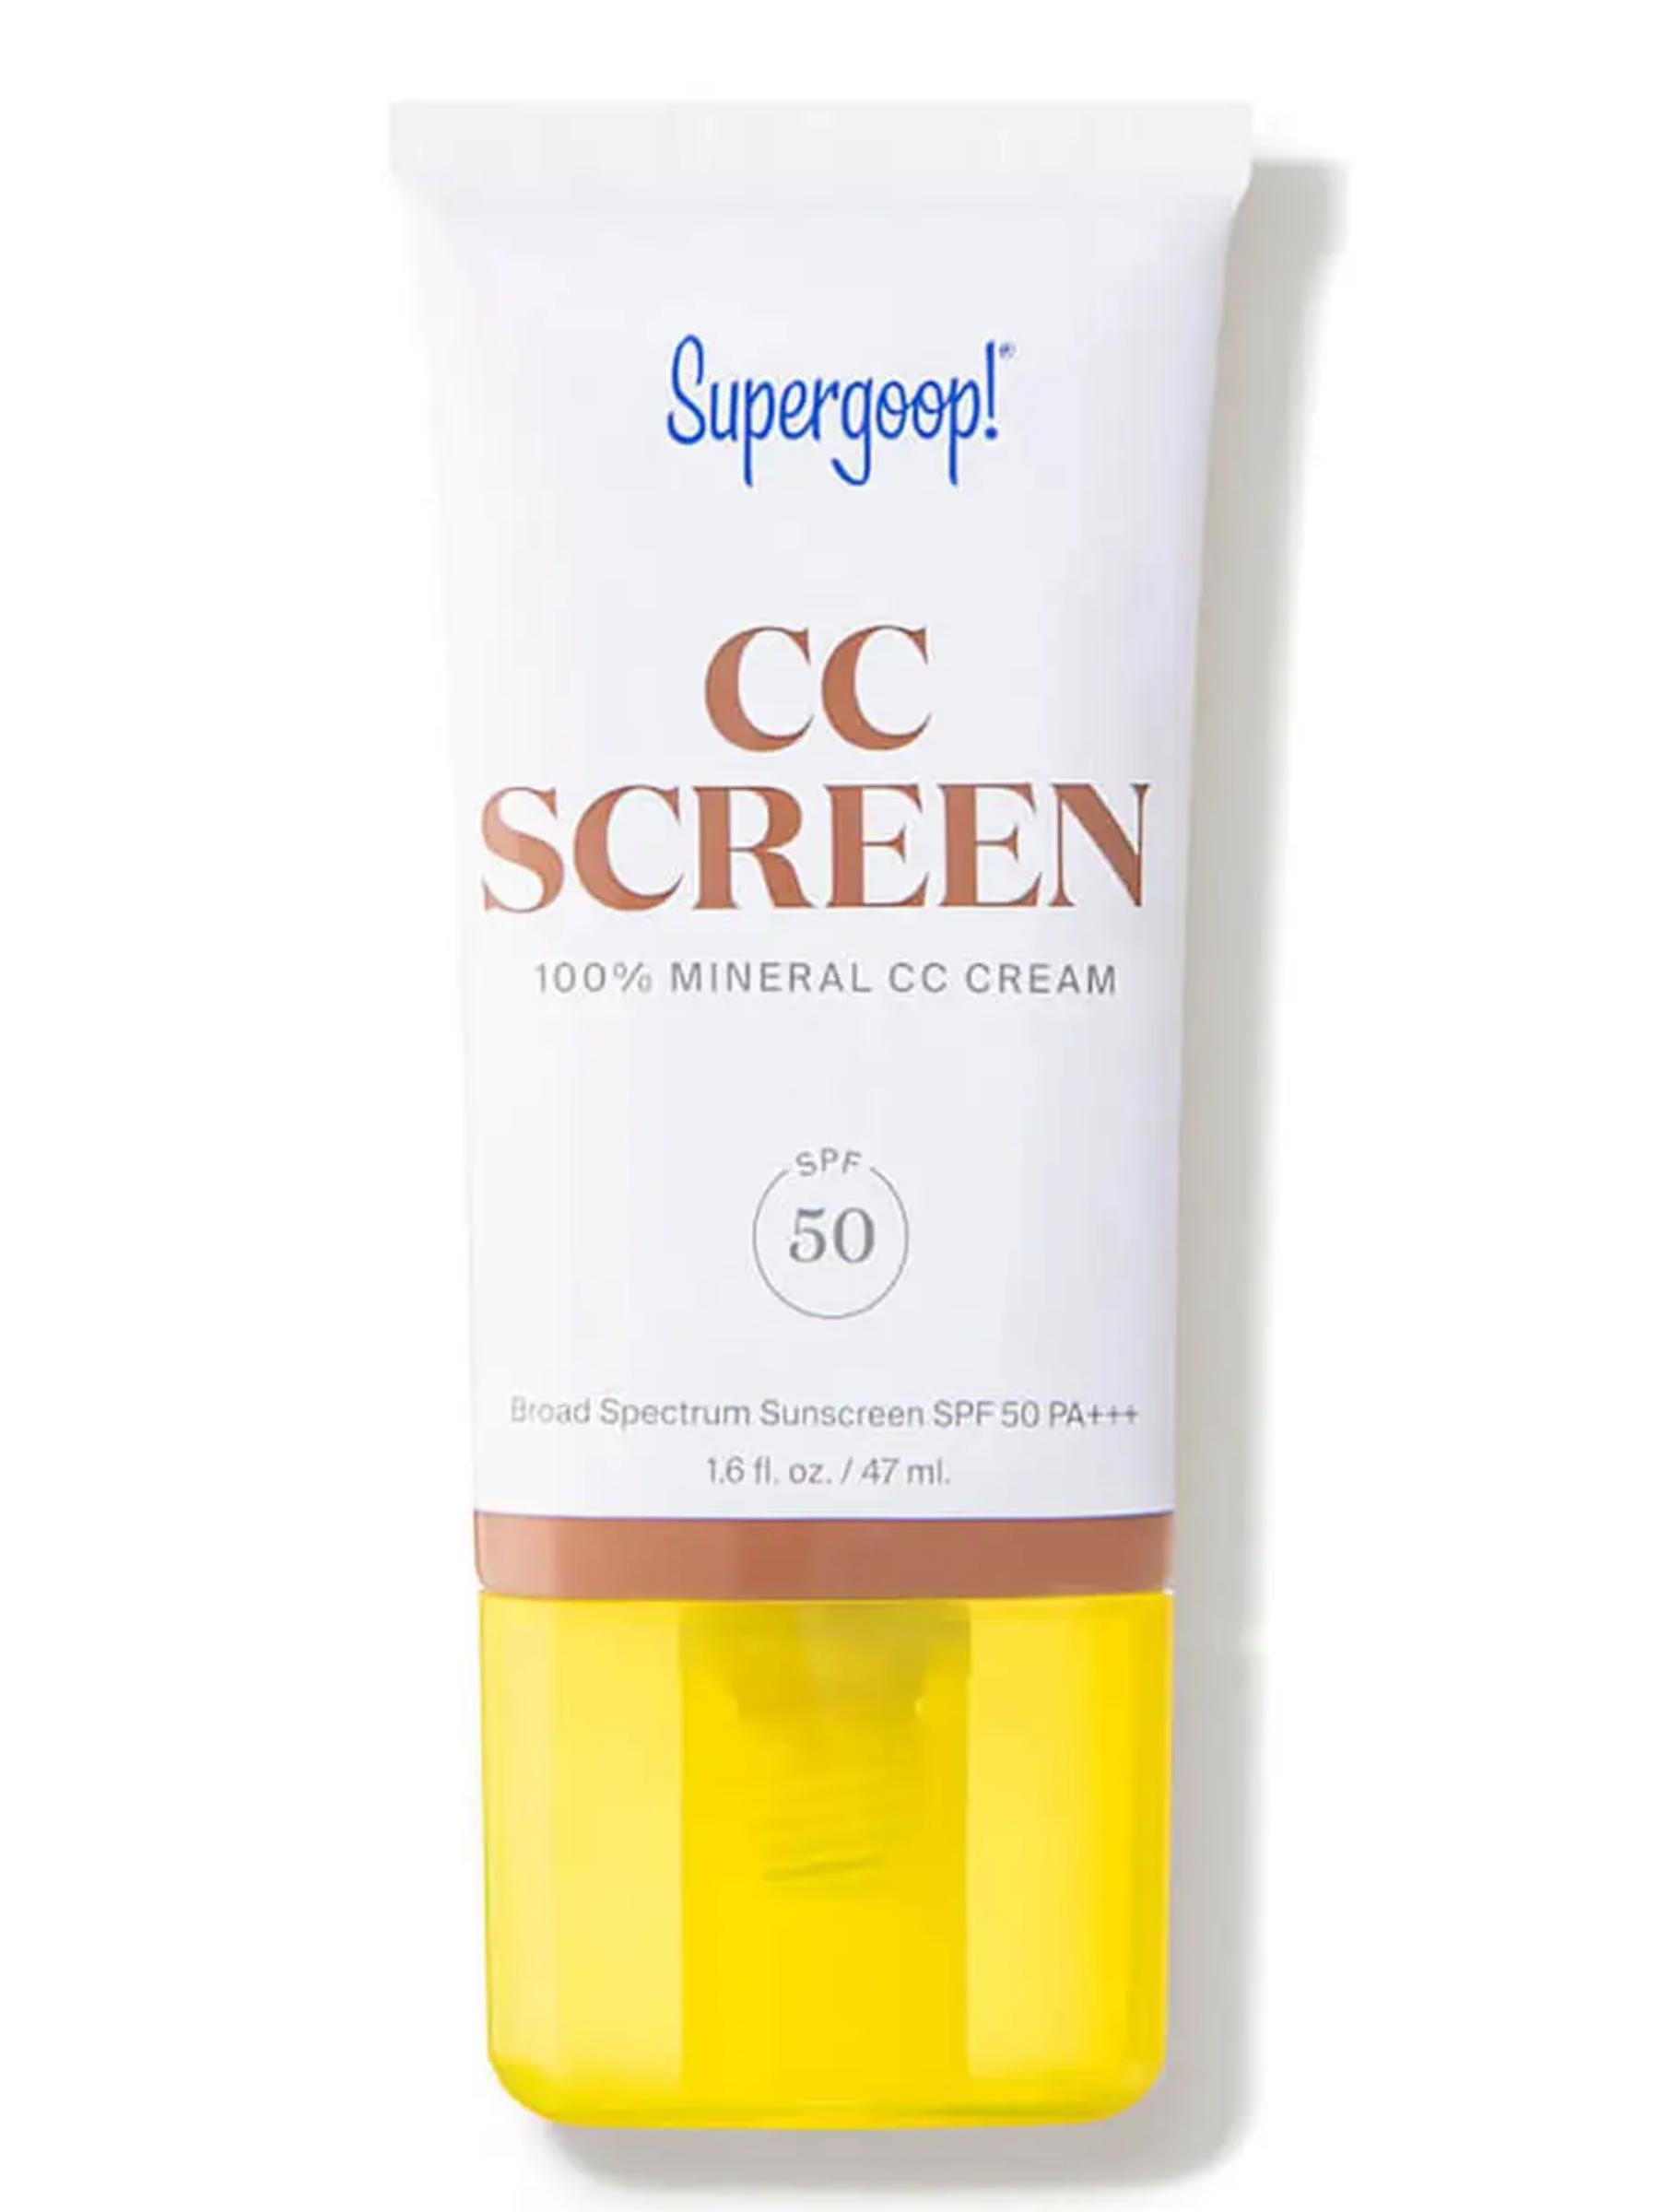 <p>This 100% mineral formula suits even the most sensitive of skin types while providing some of the <a href="https://www.glamour.com/gallery/best-sunscreen-for-sensitive-skin?mbid=synd_msn_rss&utm_source=msn&utm_medium=syndication">best sun protection</a>, with an SPF of 50 and a PA+++ rating. Despite the barely-there feel, it’s packed with hardworking ingredients like apple extract, which instantly illuminates the skin, and Irish moss extract to reduce the effects of free radicals. According to <a href="https://marmurmedical.com/teresa-song-md/">Teresa Song, MD</a>, board-certified dermatologist at Marmur Medical, the formula, which also includes antioxidants and ample humectants, is great for all skin types, especially those with sun-damaged or sensitized skin. The medium coverage is enough to minimize redness and the appearance of imperfections, and blends out to leave a natural silky finish.</p> <p><strong>Size:</strong> 1.6 ounces / <strong>Shades:</strong> 15 / <strong>Key Ingredients:</strong> Apple extract, Irish moss / <strong>Finish:</strong> Natural, luminous / <strong>SPF:</strong> 50</p> <ul> <li><strong>Pros</strong>: Great sun protection, no irritating ingredients</li> <li><strong>Cons</strong>: Settles into fine lines</li> </ul> $44, Amazon. <a href="https://www.amazon.com/Supergoop-Screen-Color-Corrector-Moisturizer-Foundation/dp/B08F2QQT3L">Get it now!</a><p>Sign up for today’s biggest stories, from pop culture to politics.</p><a href="https://www.glamour.com/newsletter/news?sourceCode=msnsend">Sign Up</a>